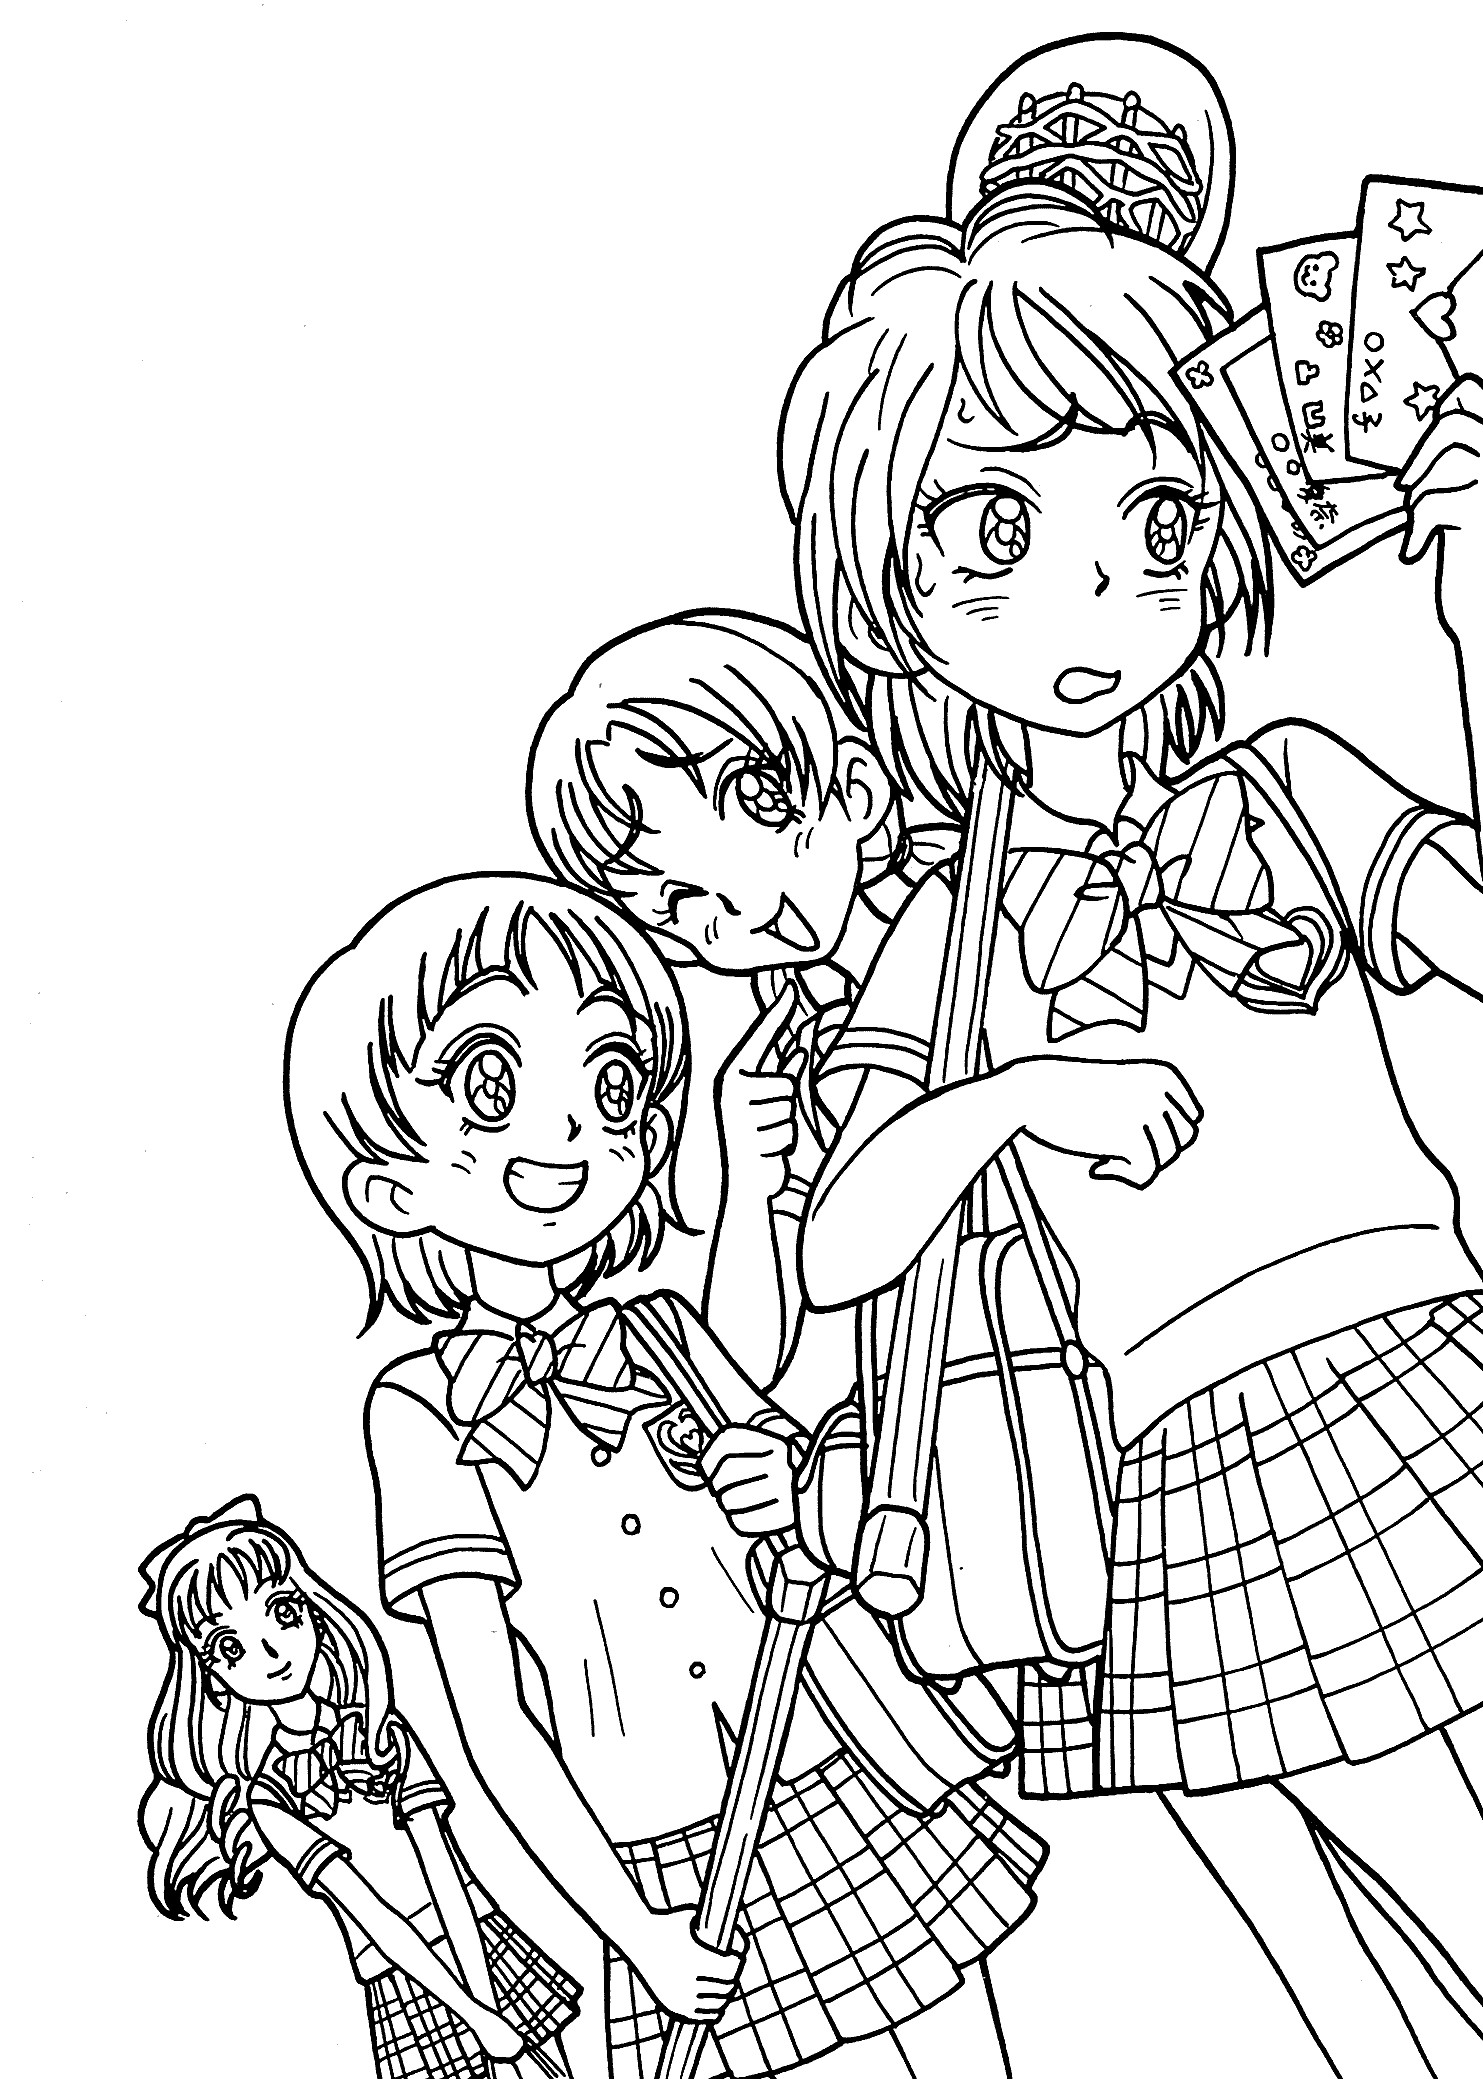 Coloring Pages Of Anime Girls
 Anime Girls Group Coloring Page Coloring Home